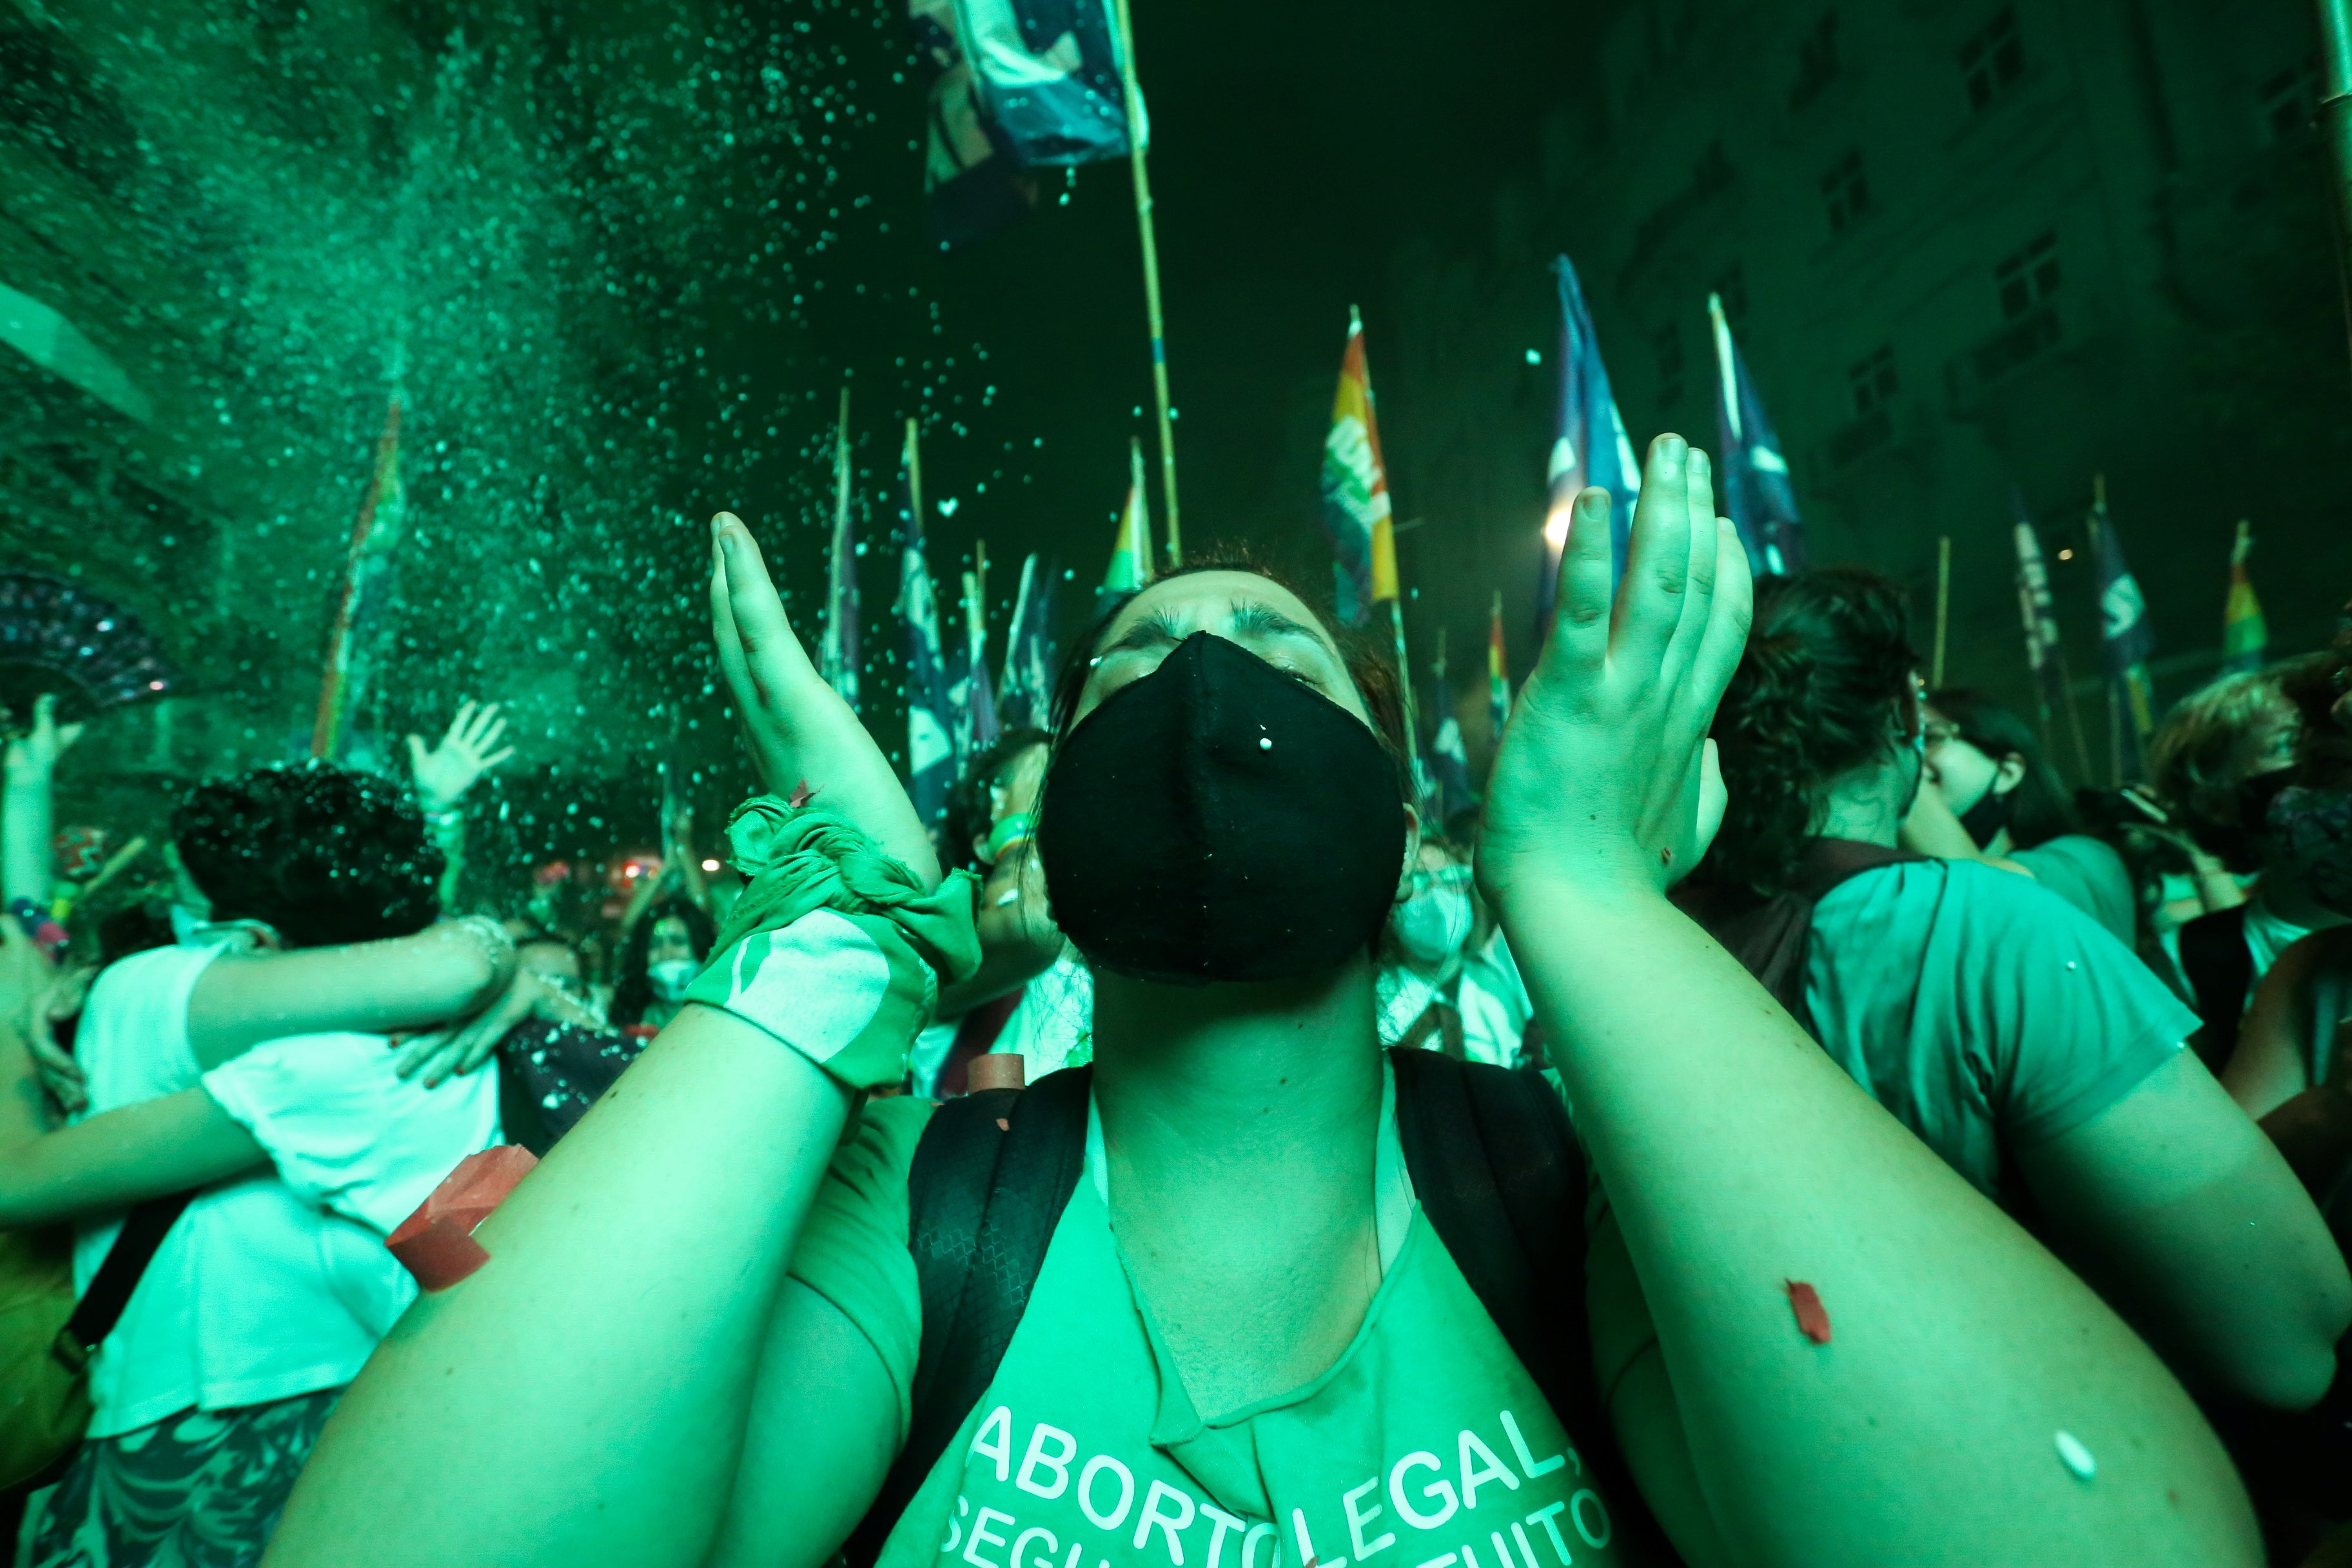 Abortion has previously only been allowed in Argentina if the pregnancy is due to rape or in instances when the mother’s health or life is in danger